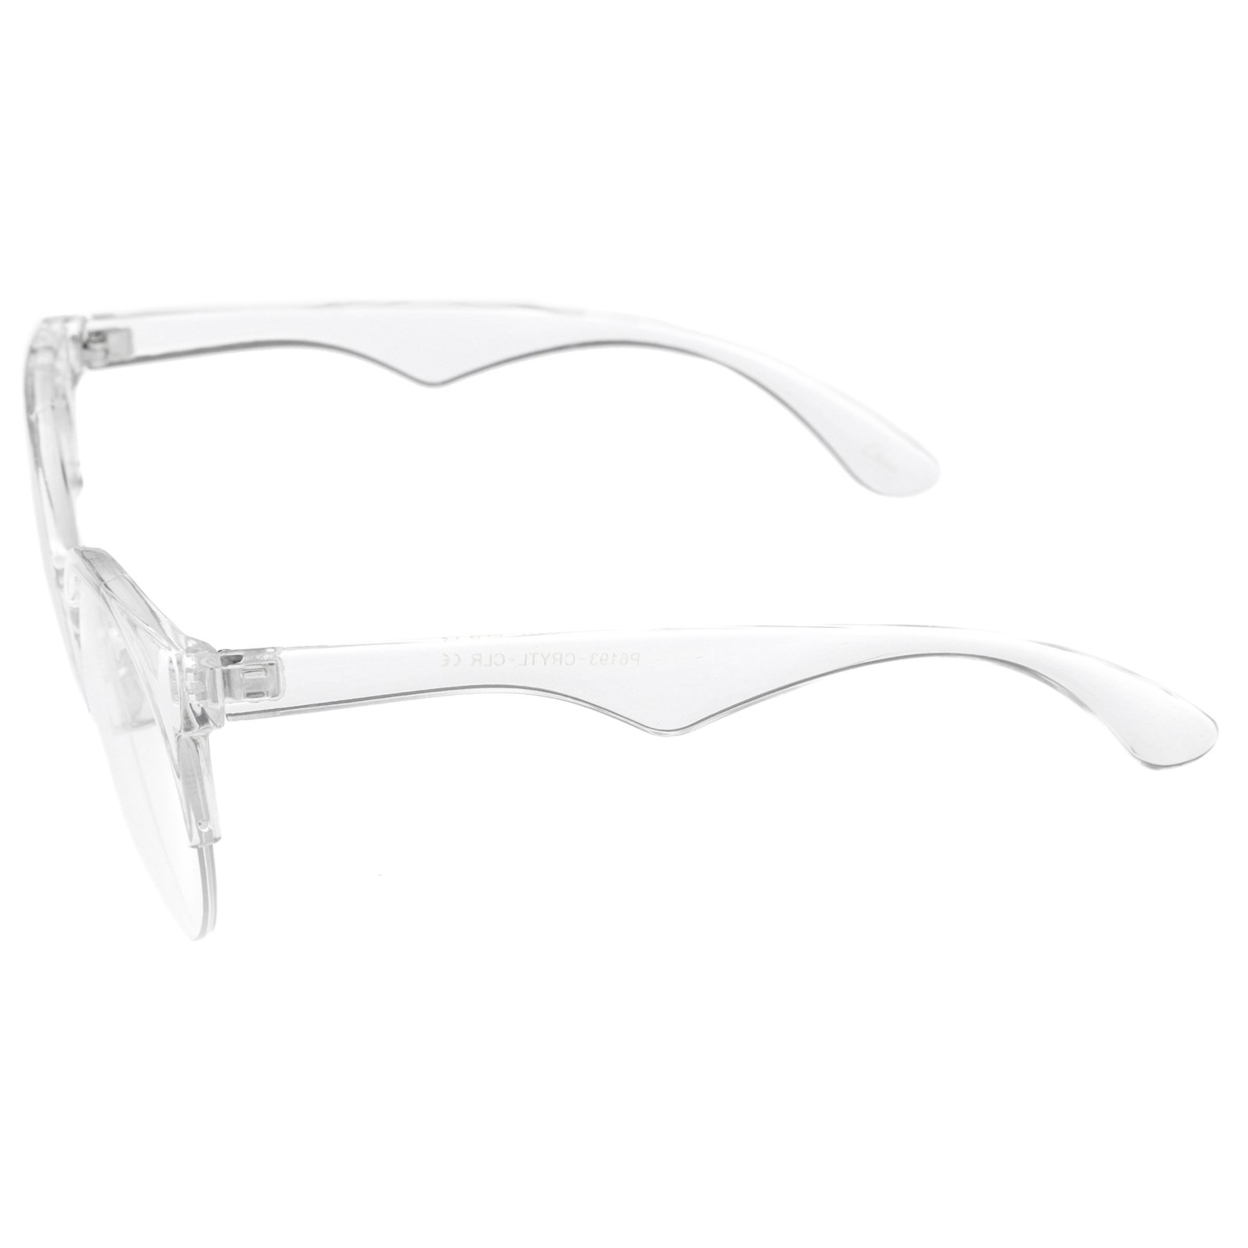 Modern Translucent Frame Round Clear Lens Semi-Rimless Eyeglasses 54mm - Clear / Clear